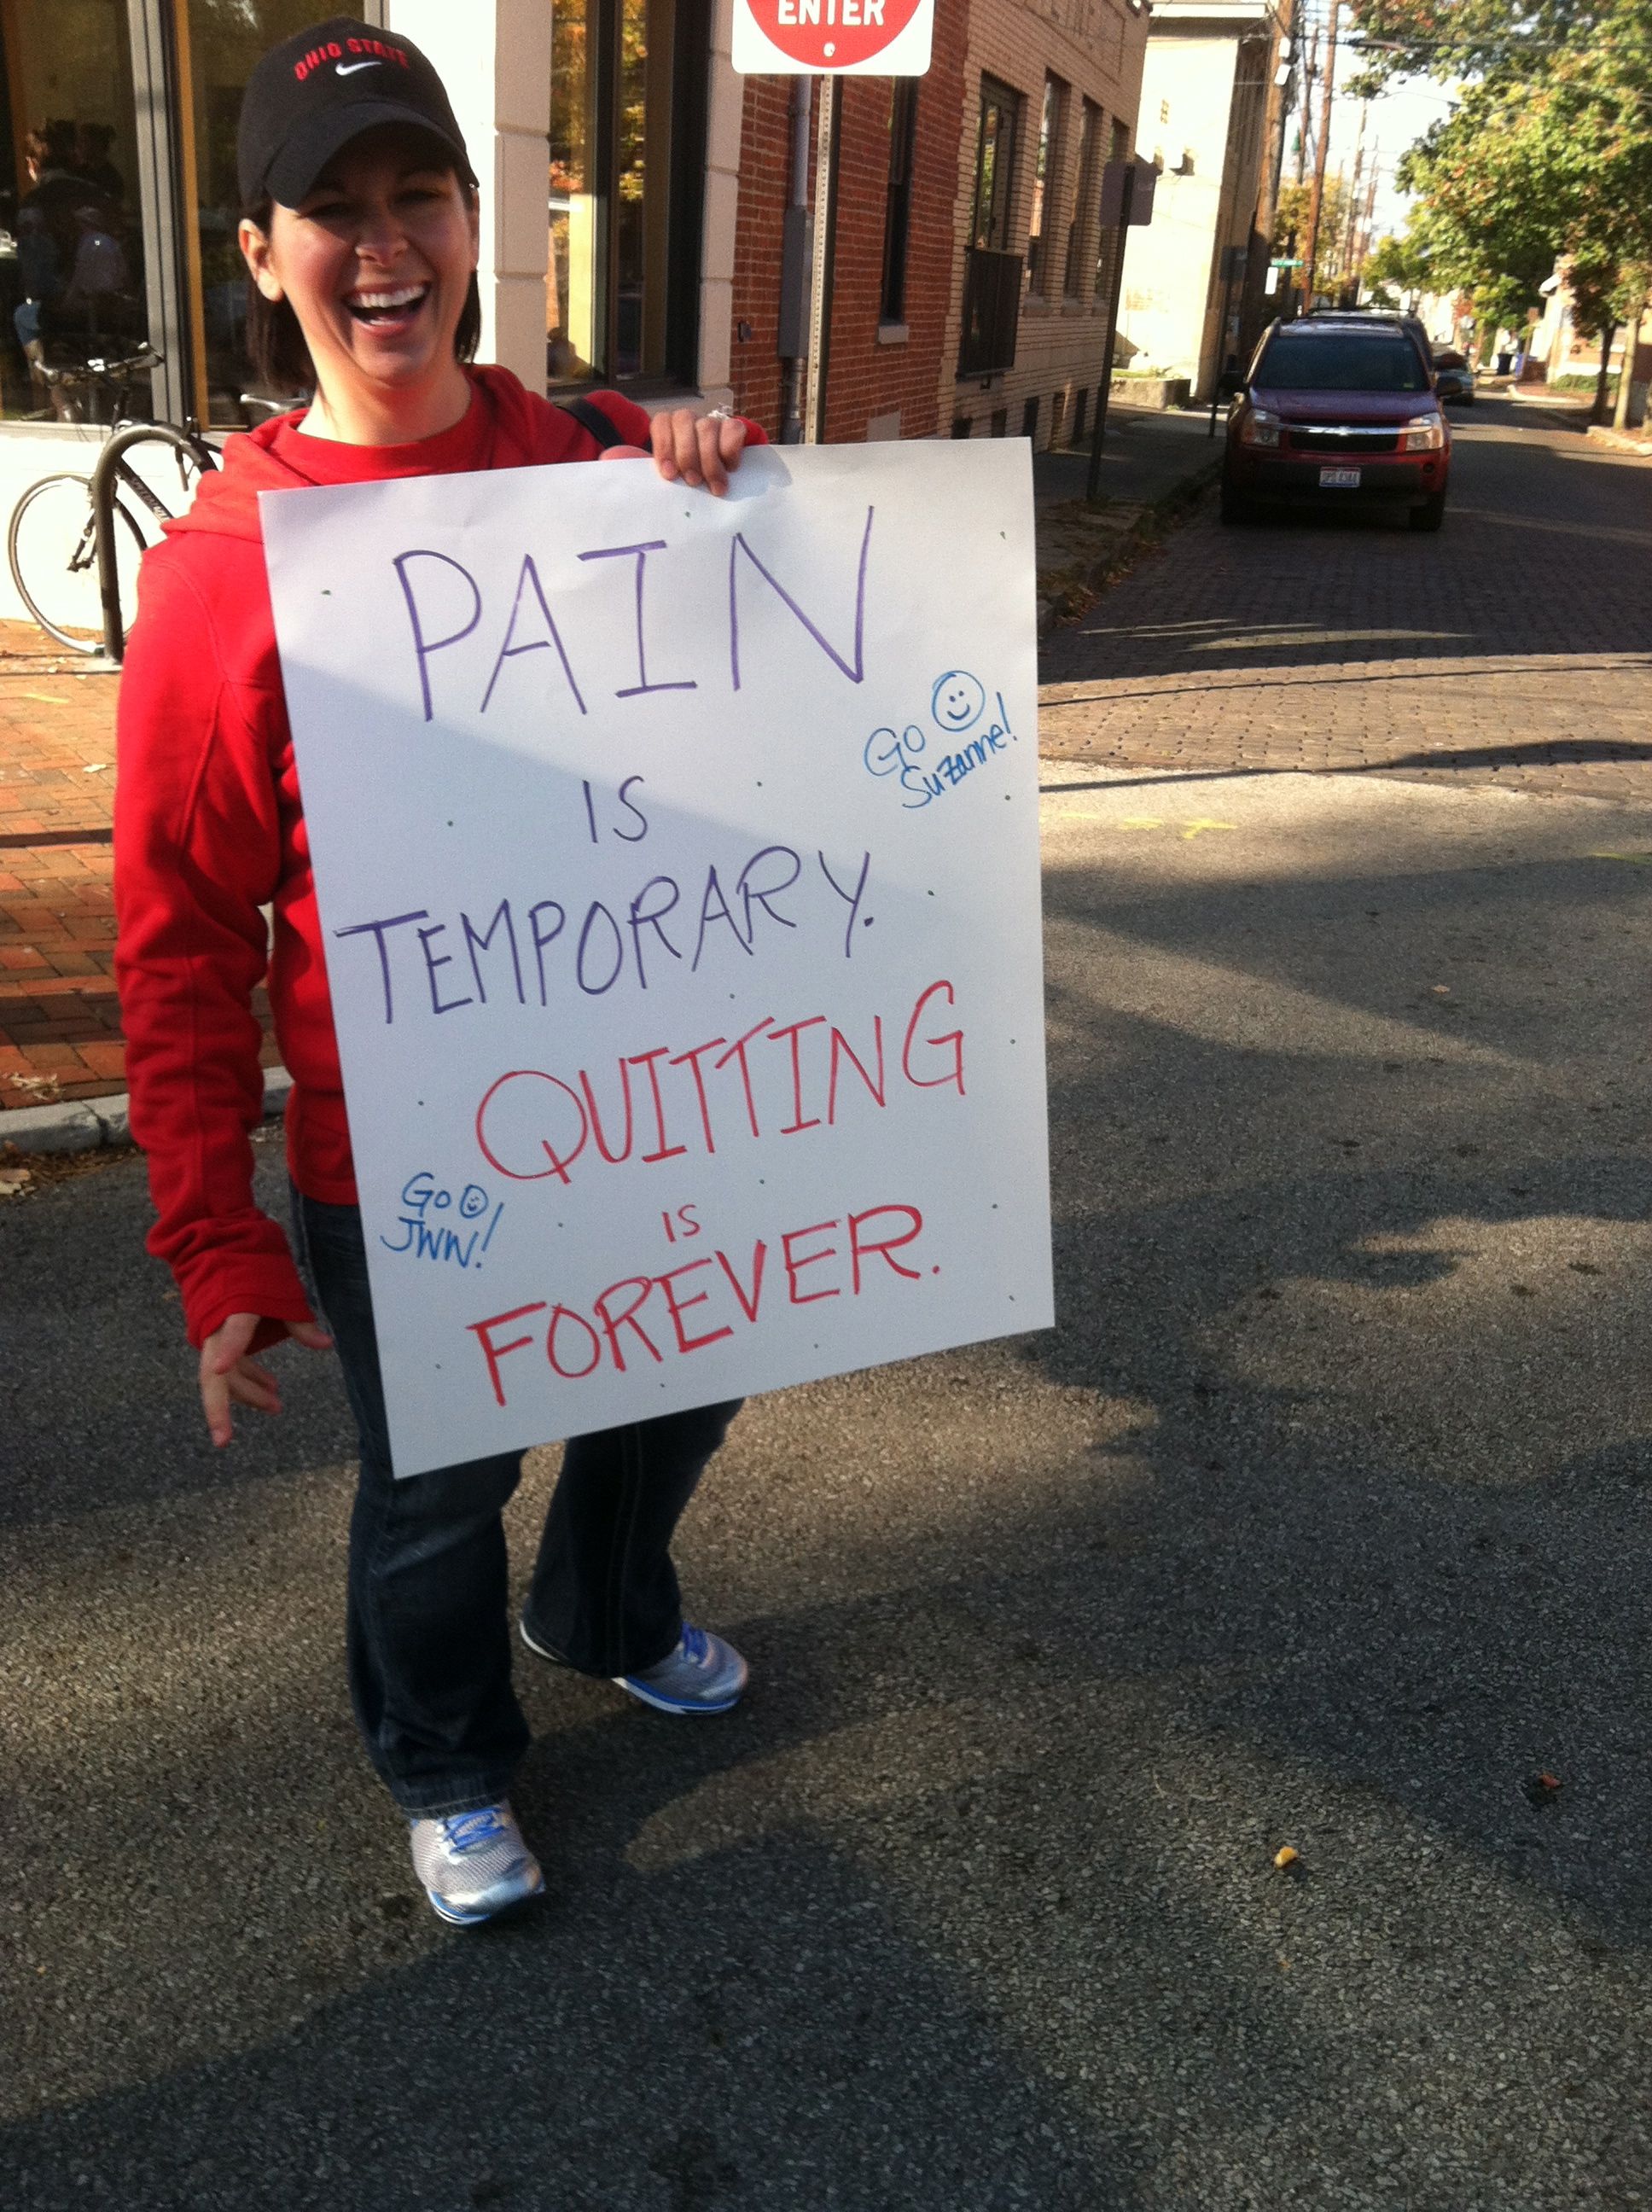 a spectator at the Nationwide Children's Hospital Columbus Half Marathon 2012 holding a sign that says "Pain is temporary, quitting is forever"